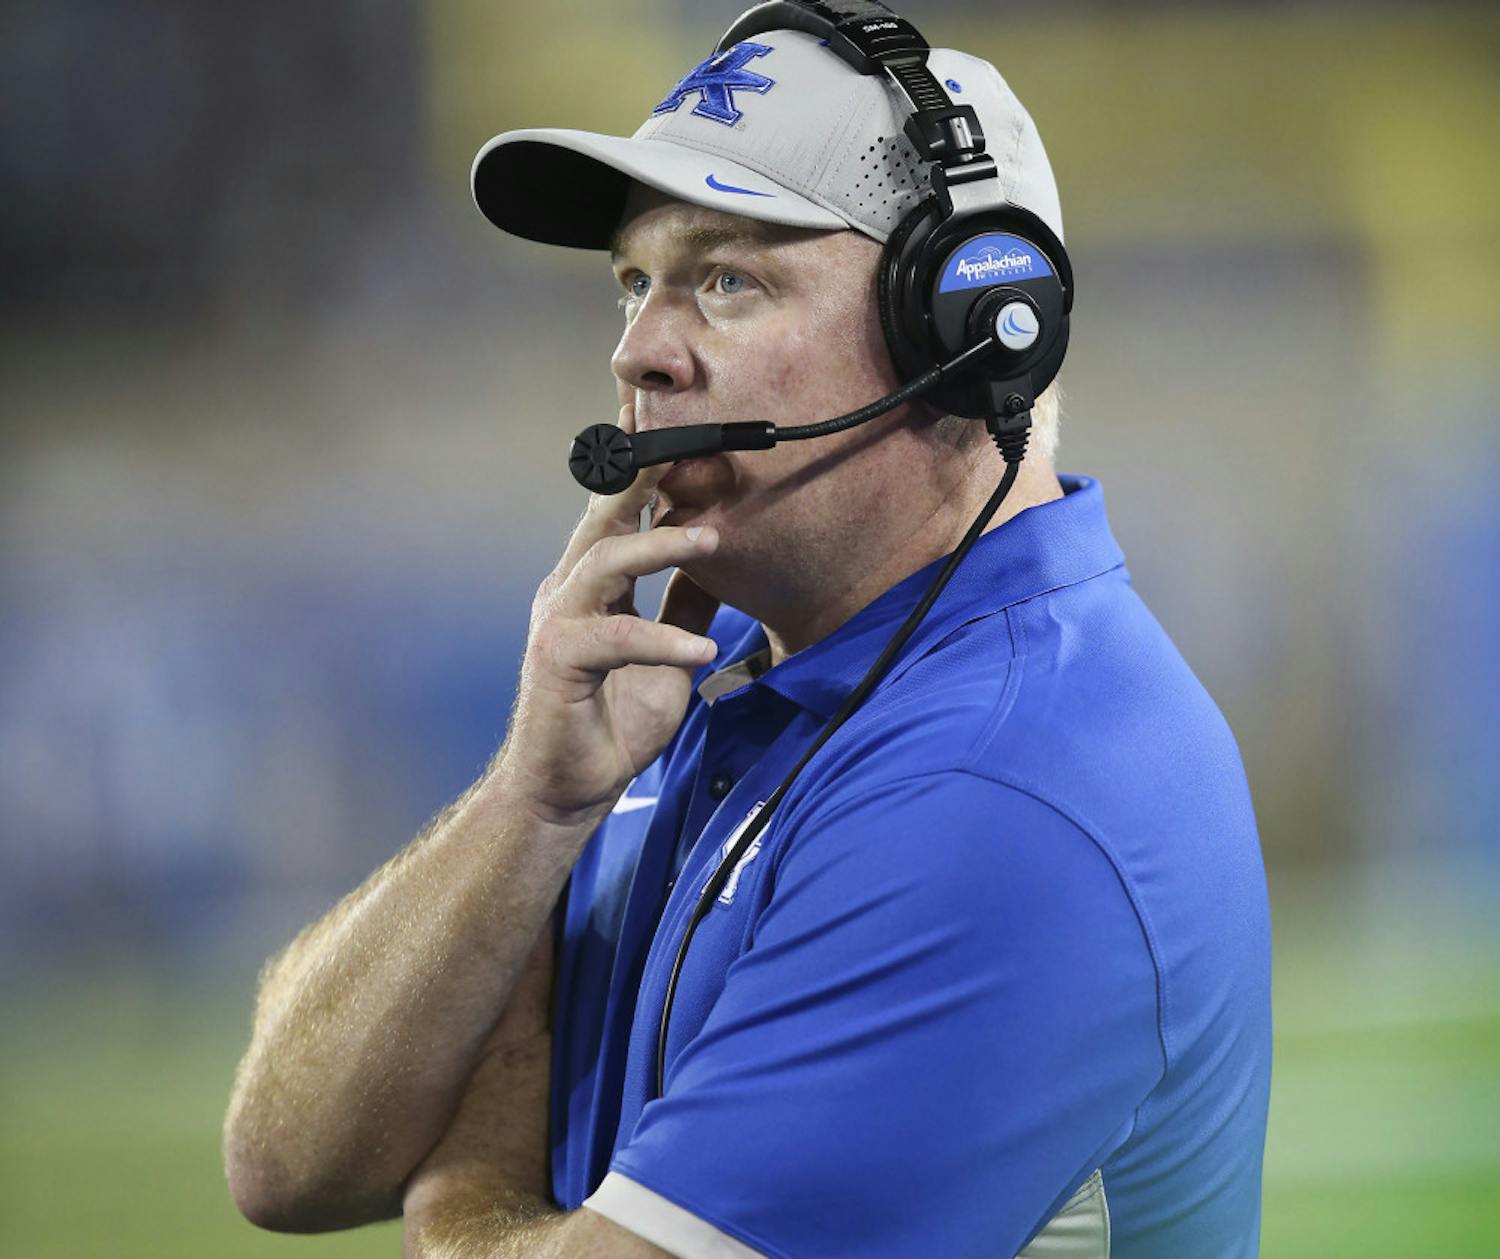 FILE - In this Sept. 5, 2015, file photo, Kentucky coach Mark Stoops watches his team from the sideline during an NCAA college football game against Louisiana-Lafayette in Lexington, Ky. Stoops made an early splash in recruiting and went from two victories in year one in Lexington to five in year two. Then another second-half swoon last year made it three straight bowl-less seasons for the Wildcats. Four in a row is not acceptable in the SEC, even for a program with relatively modest expectations. (AP Photo/David Stephenson, File)